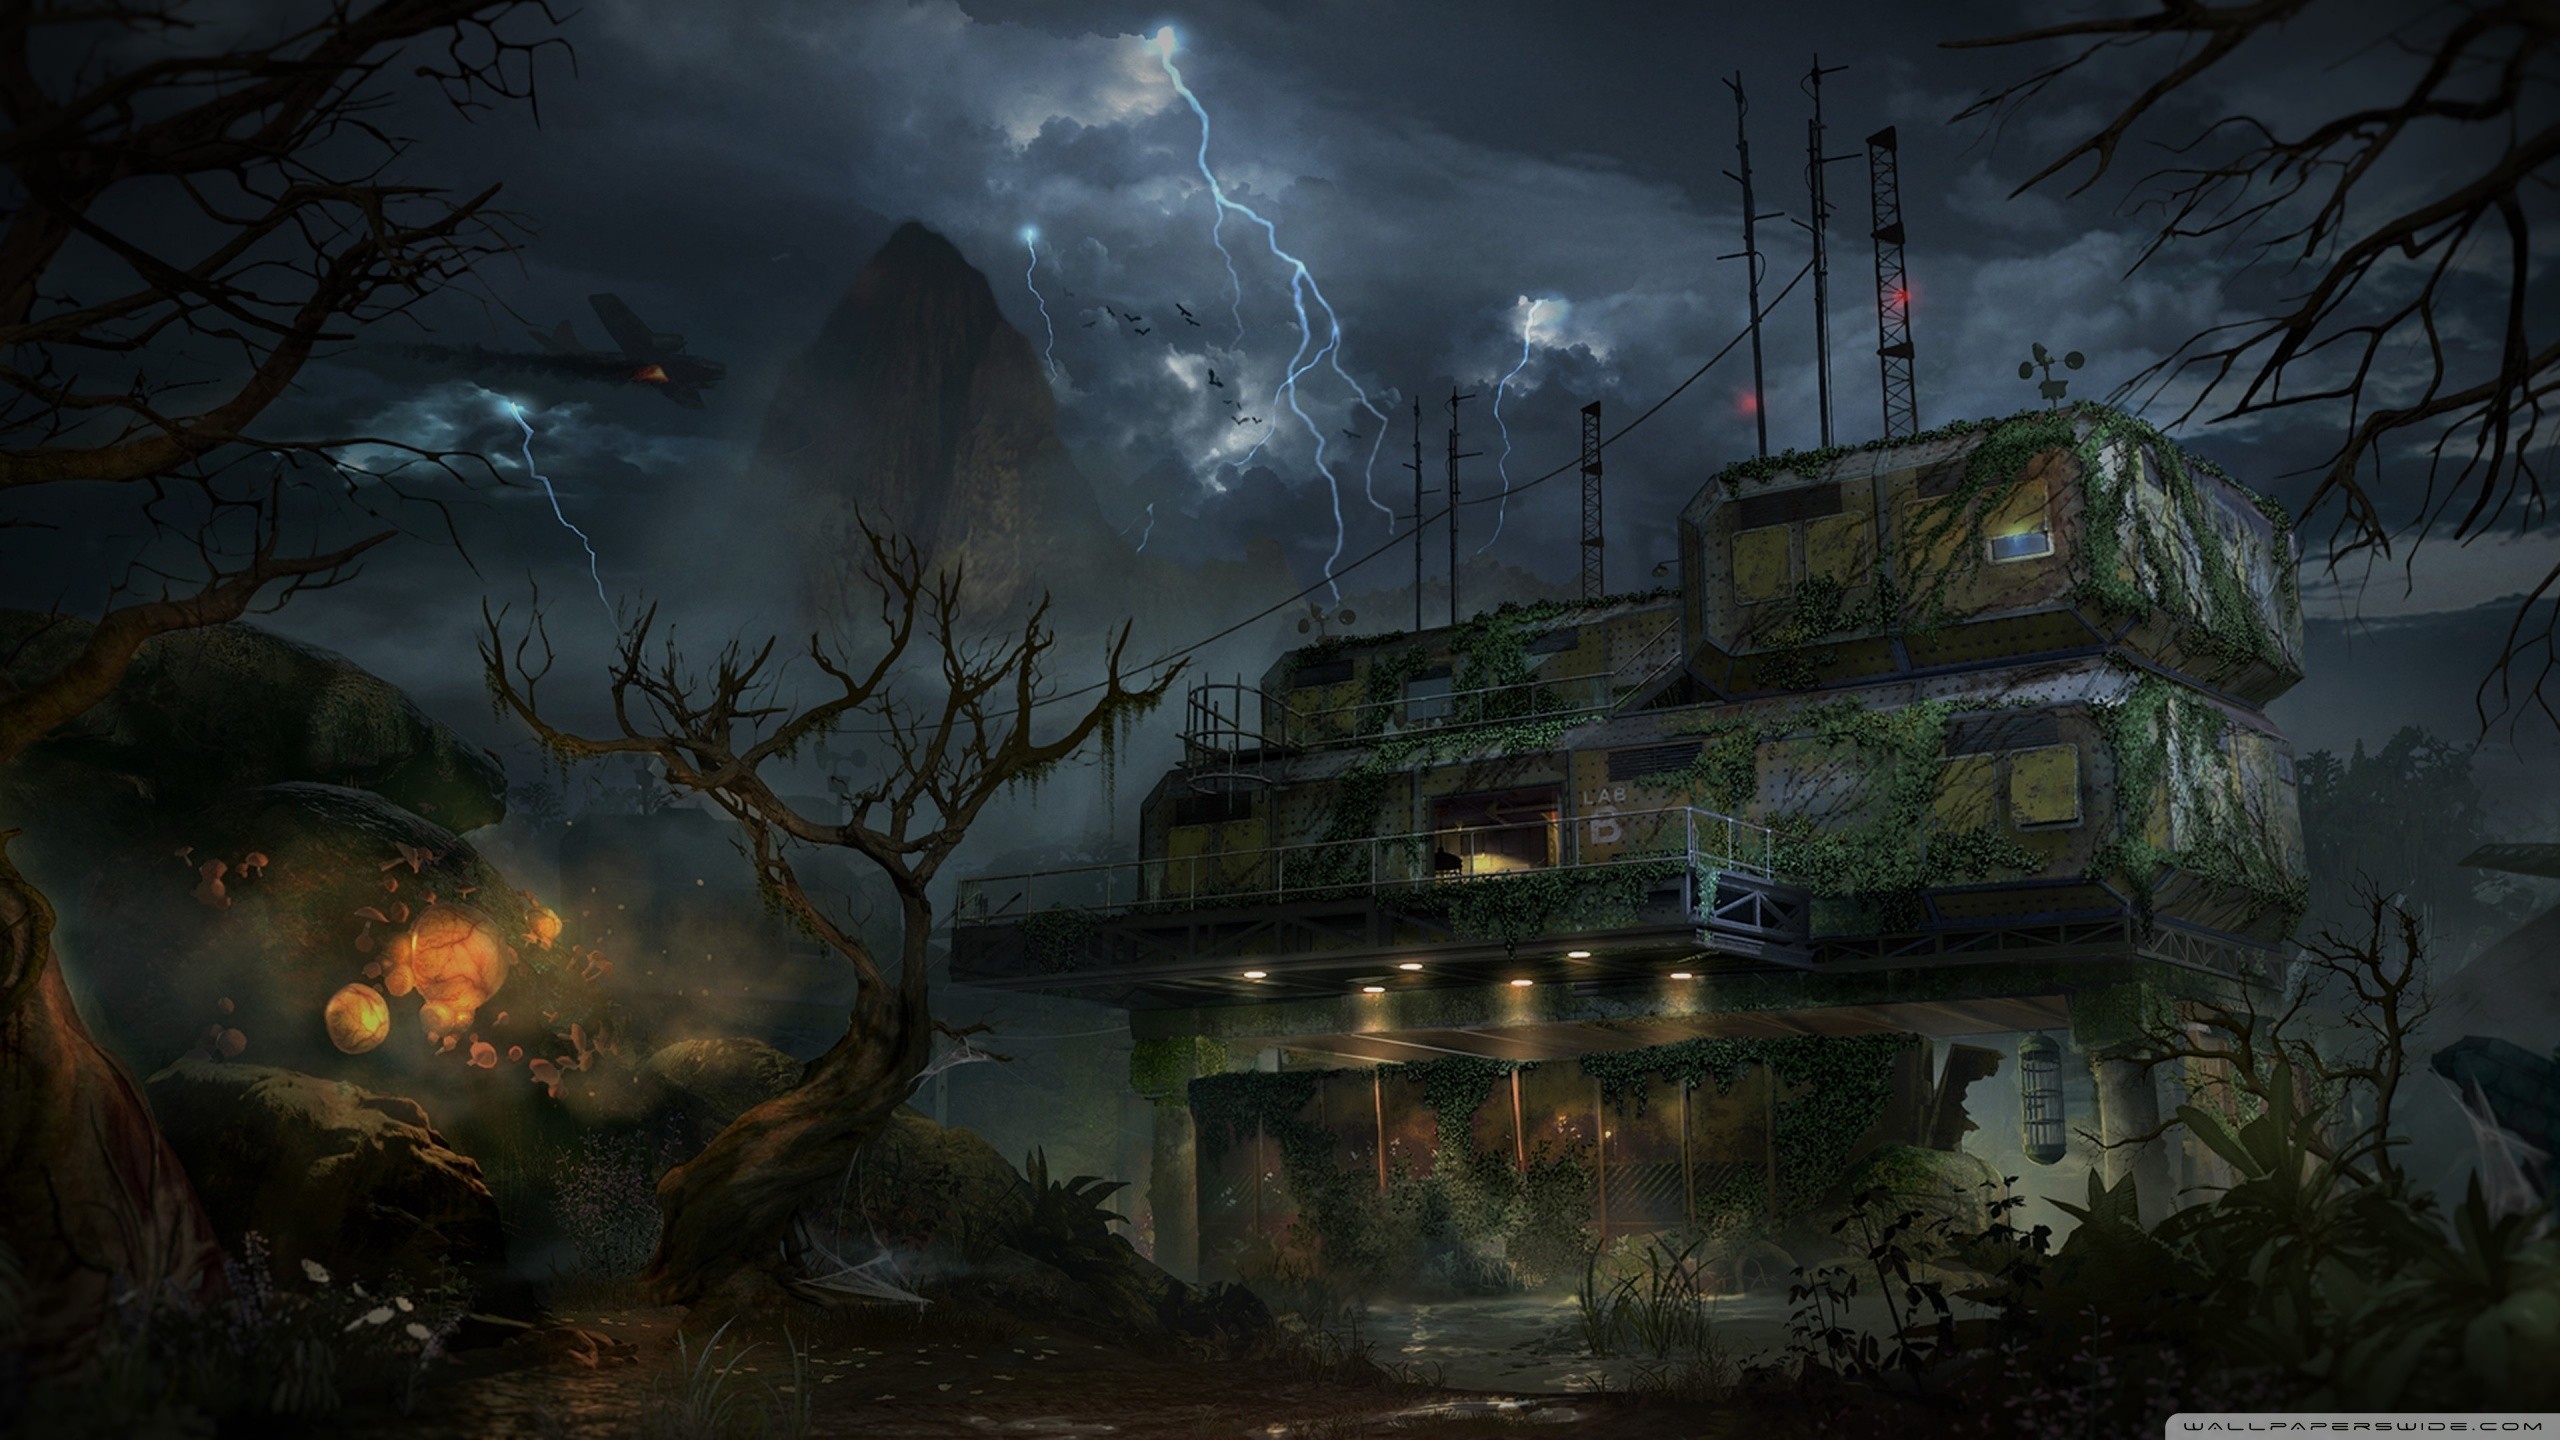 2560x1440 1920x1080 Call of Duty - Black ops 3 - Zombie Wallpaper image - Armies of .